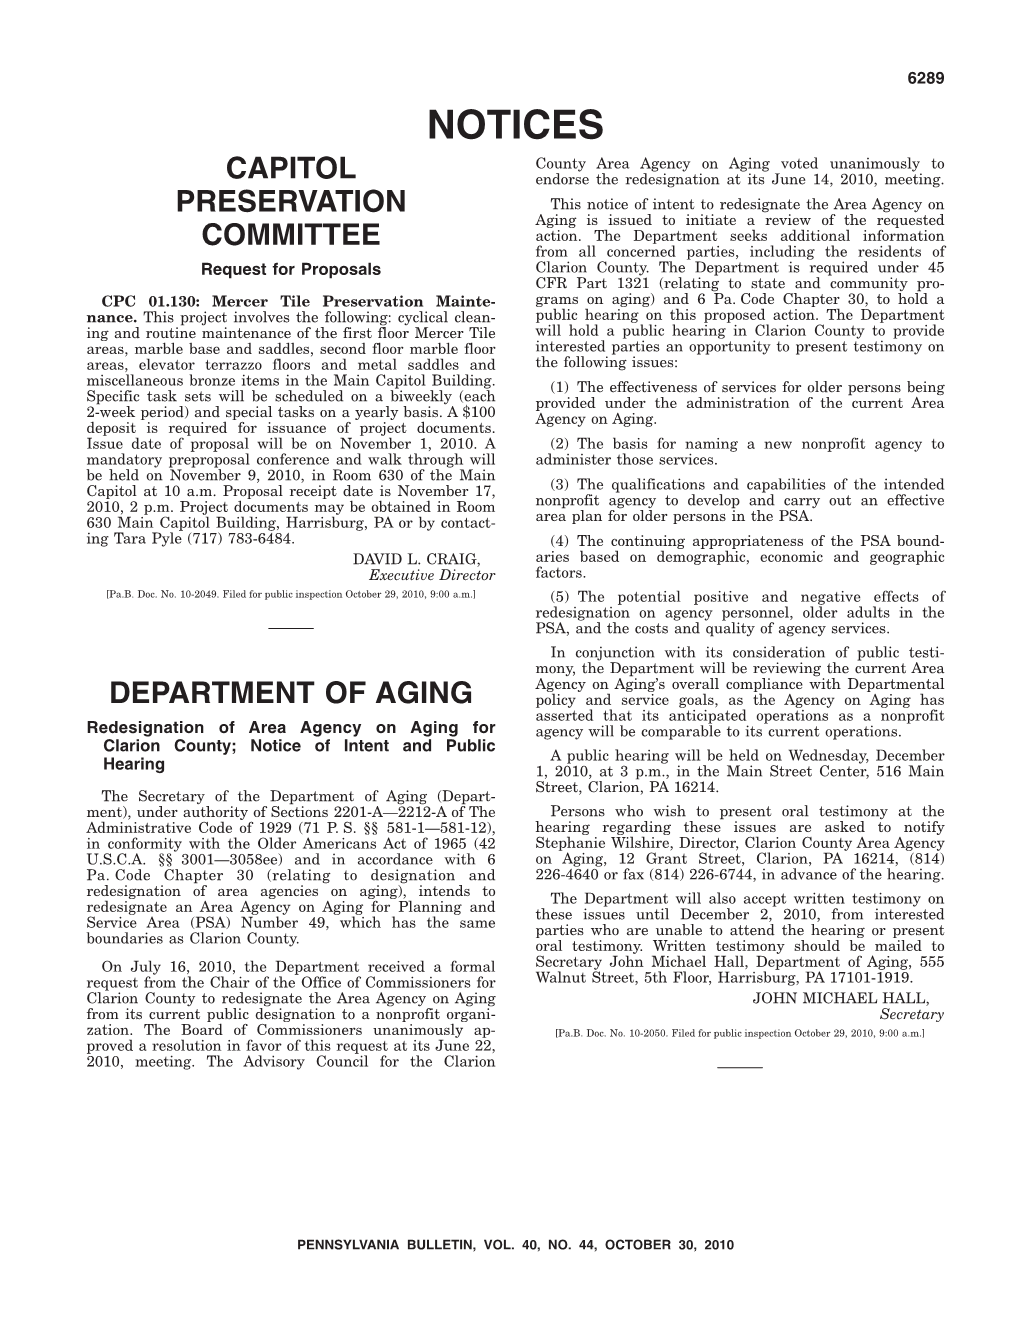 NOTICES County Area Agency on Aging Voted Unanimously to CAPITOL Endorse the Redesignation at Its June 14, 2010, Meeting